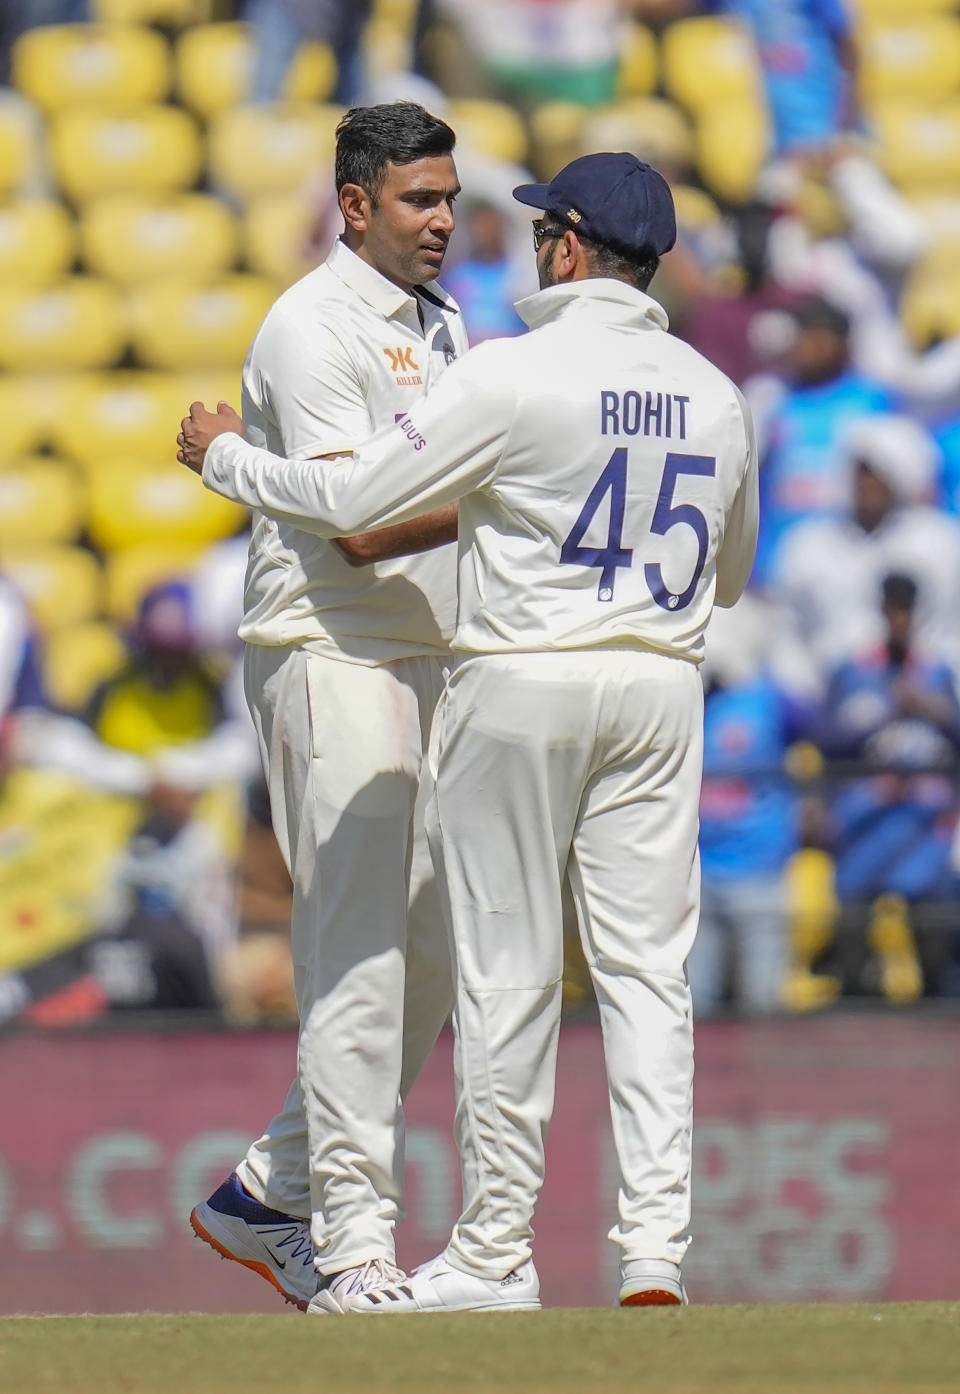 India's Ravichandran Ashwin, left, gets a tap on the shoulder from captain Rohit Sharma for his five-wicket haul during the third day of the first cricket test match between India and Australia in Nagpur, India, Saturday, Feb. 11, 2023. (AP Photo/Rafiq Maqbool)